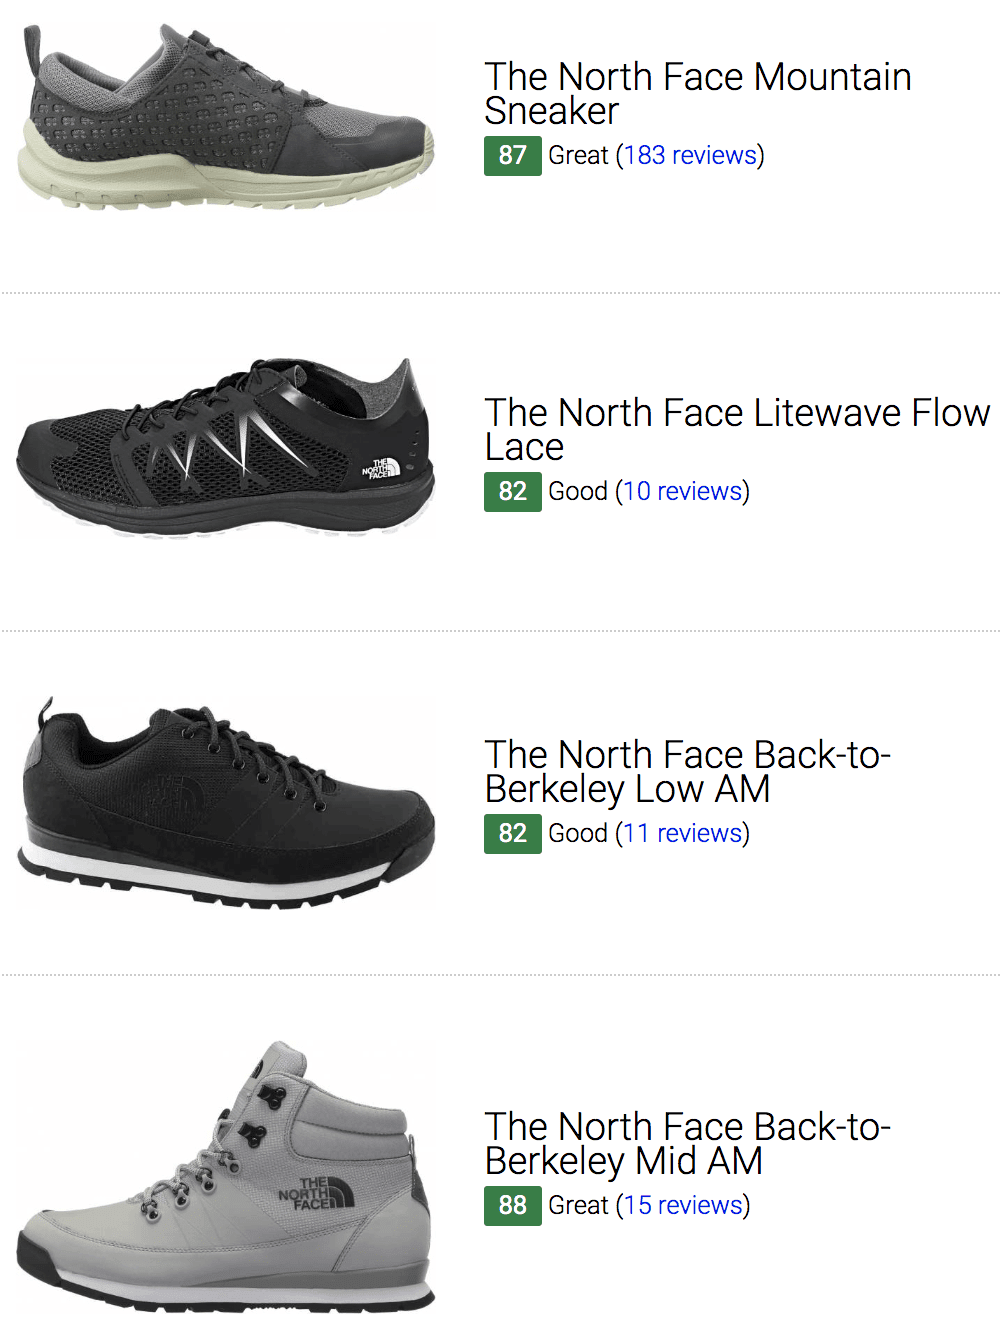 Save 13% on The North Face Sneakers (4 